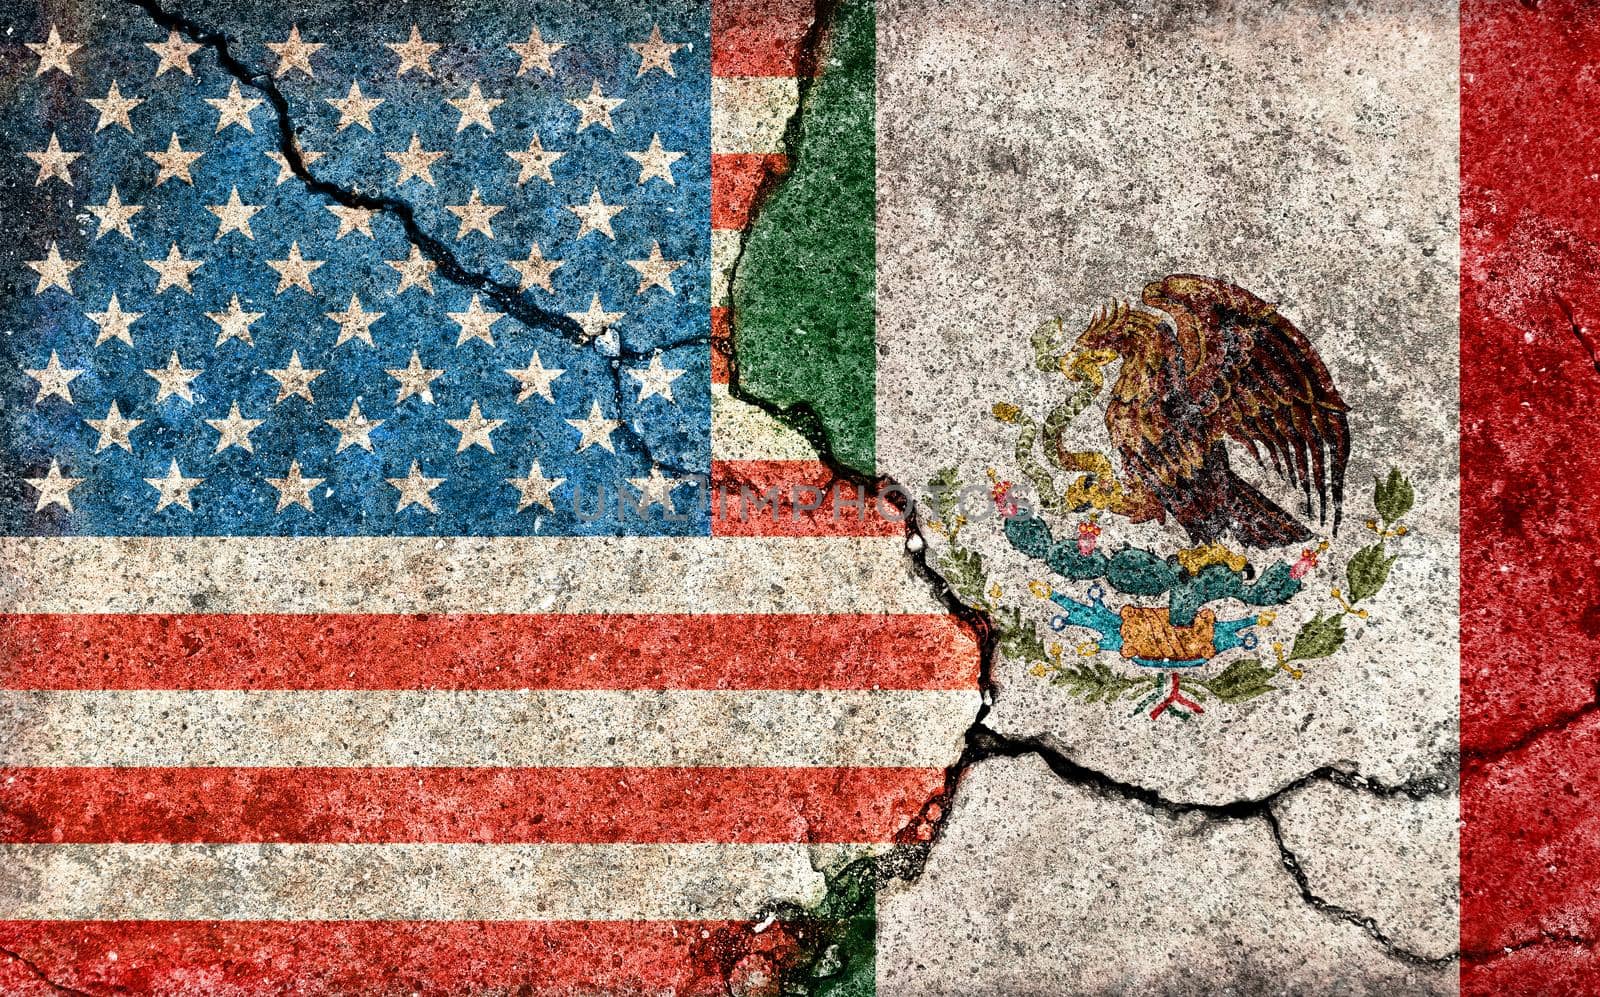 Grunge country flag illustration (cracked concrete background) / USA vs Mexico (Political or economic conflict)